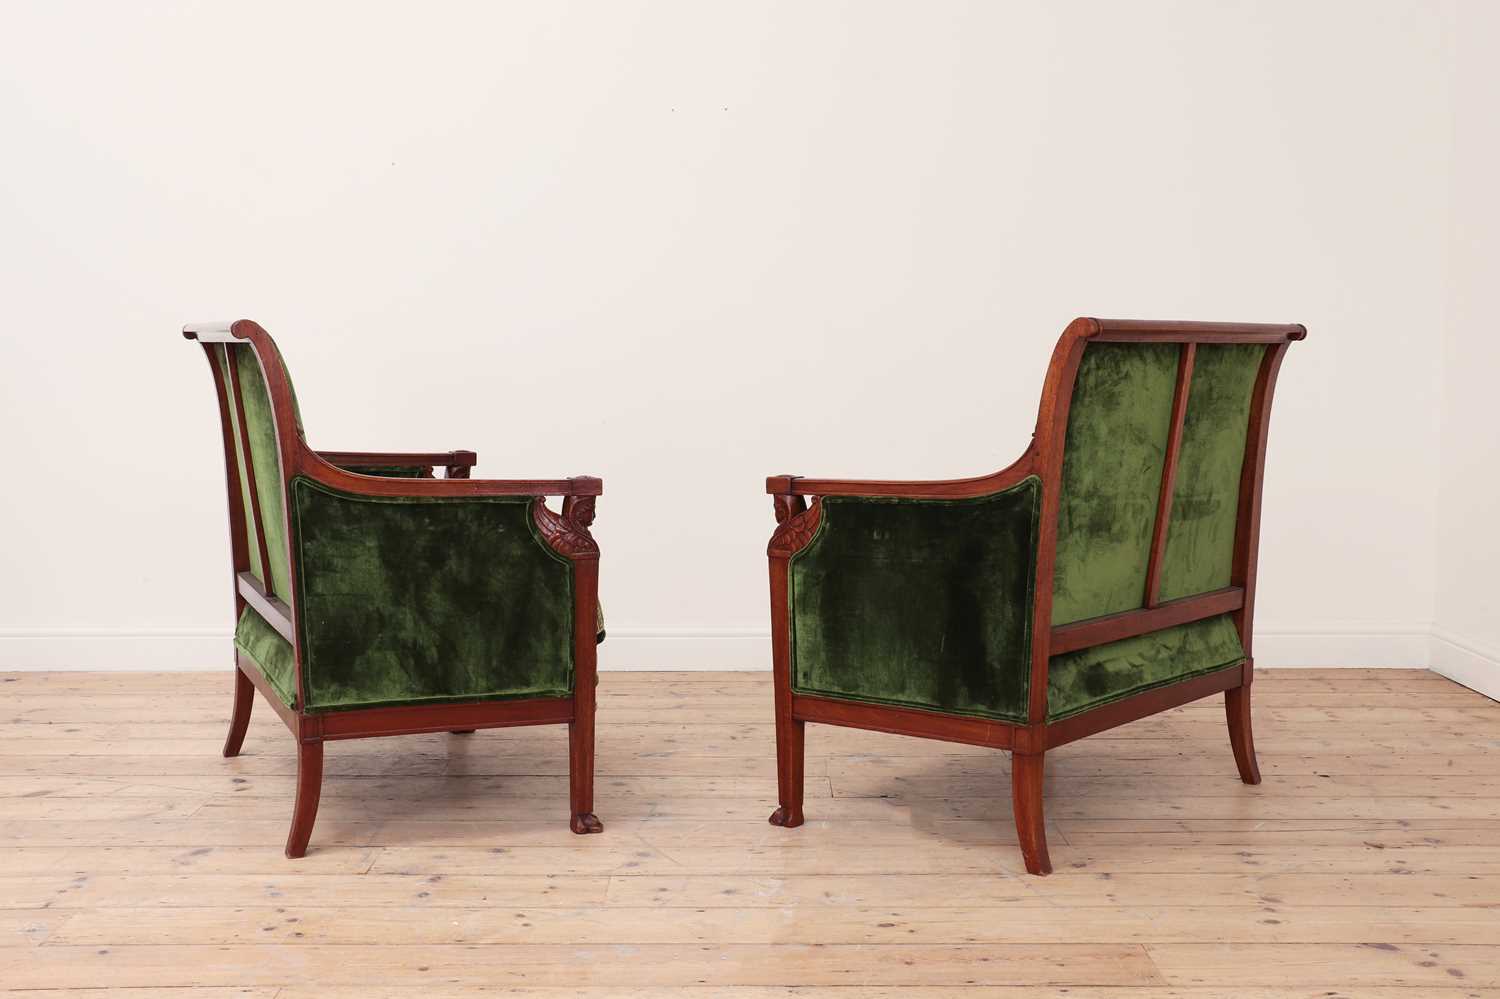 A pair of Egyptian Revival mahogany marquise chairs, - Image 4 of 6